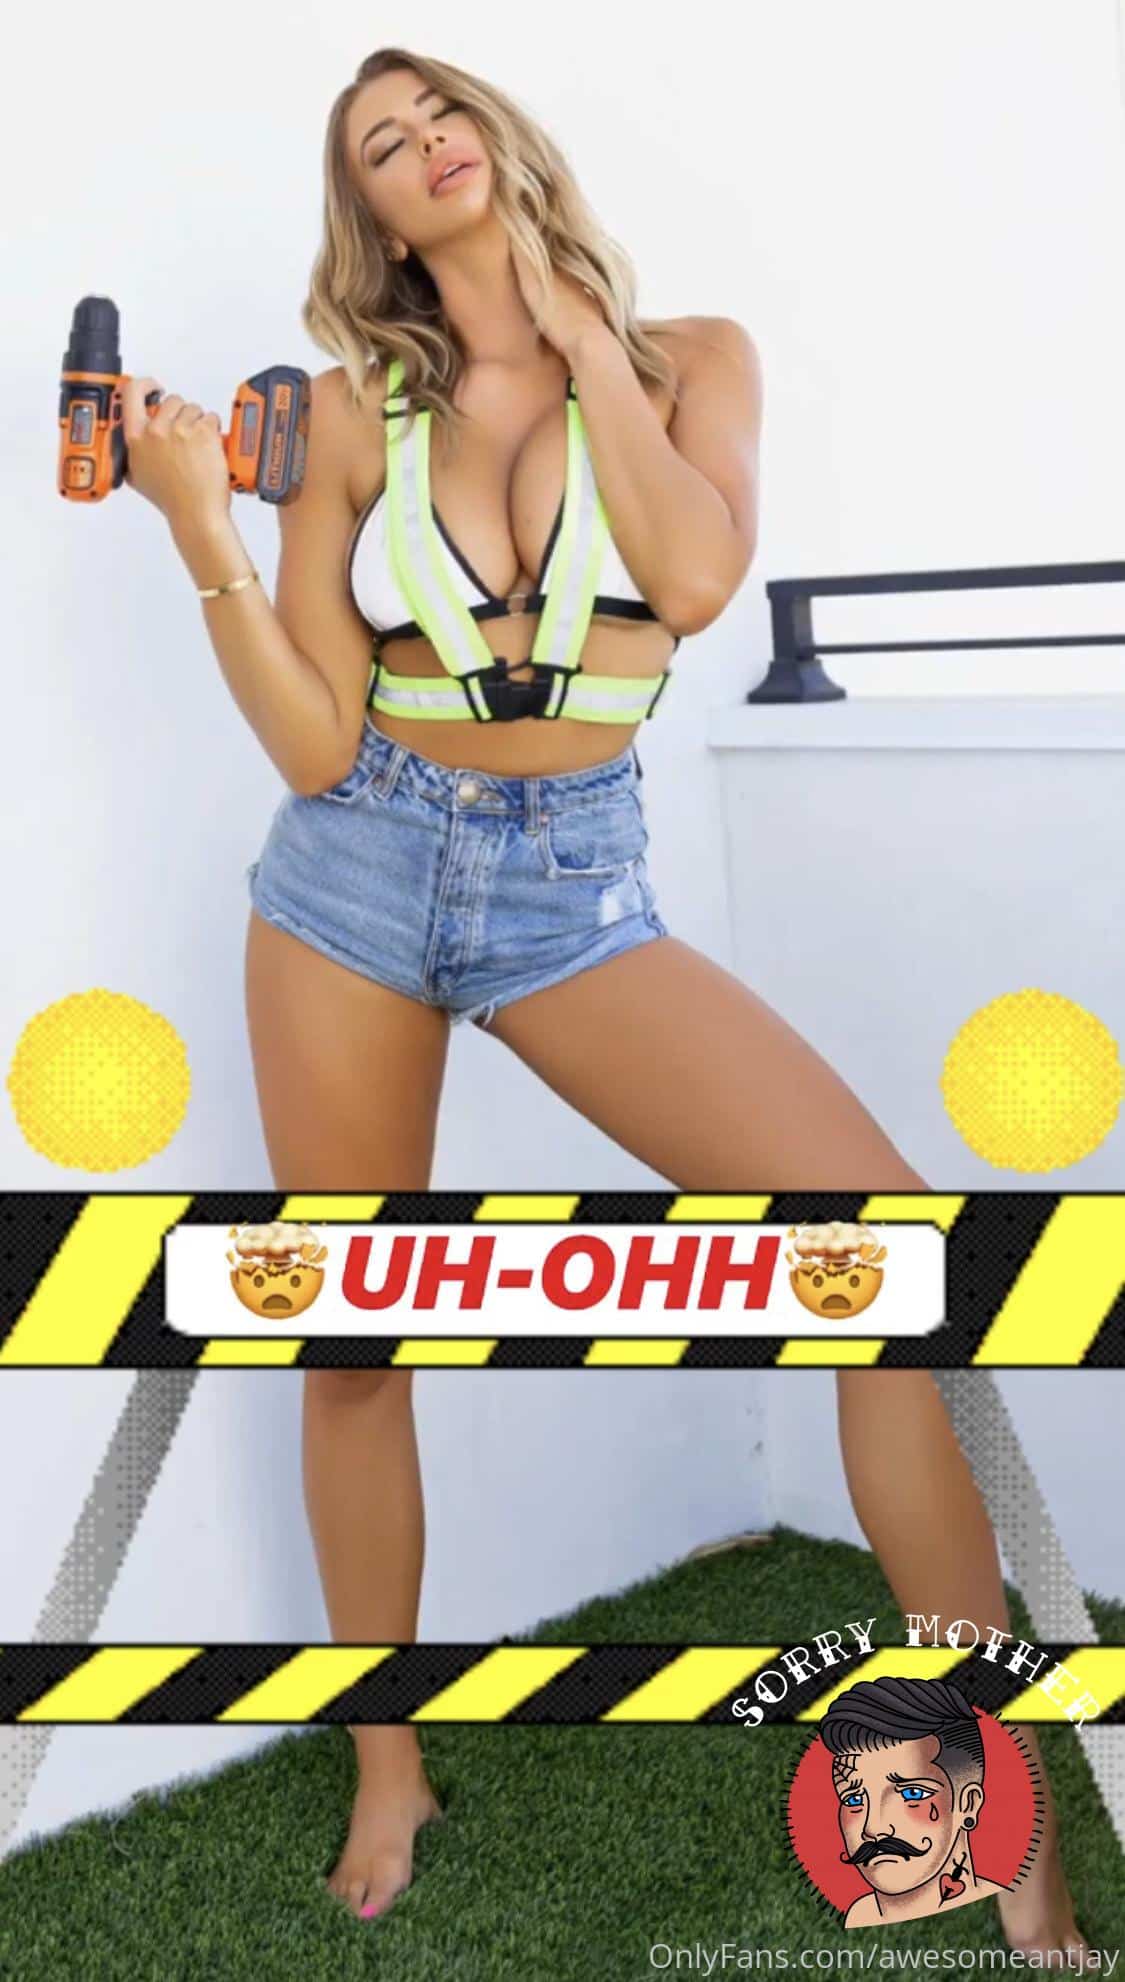 awesomeantjay 08 06 2020 45810229 UH OHH Construc